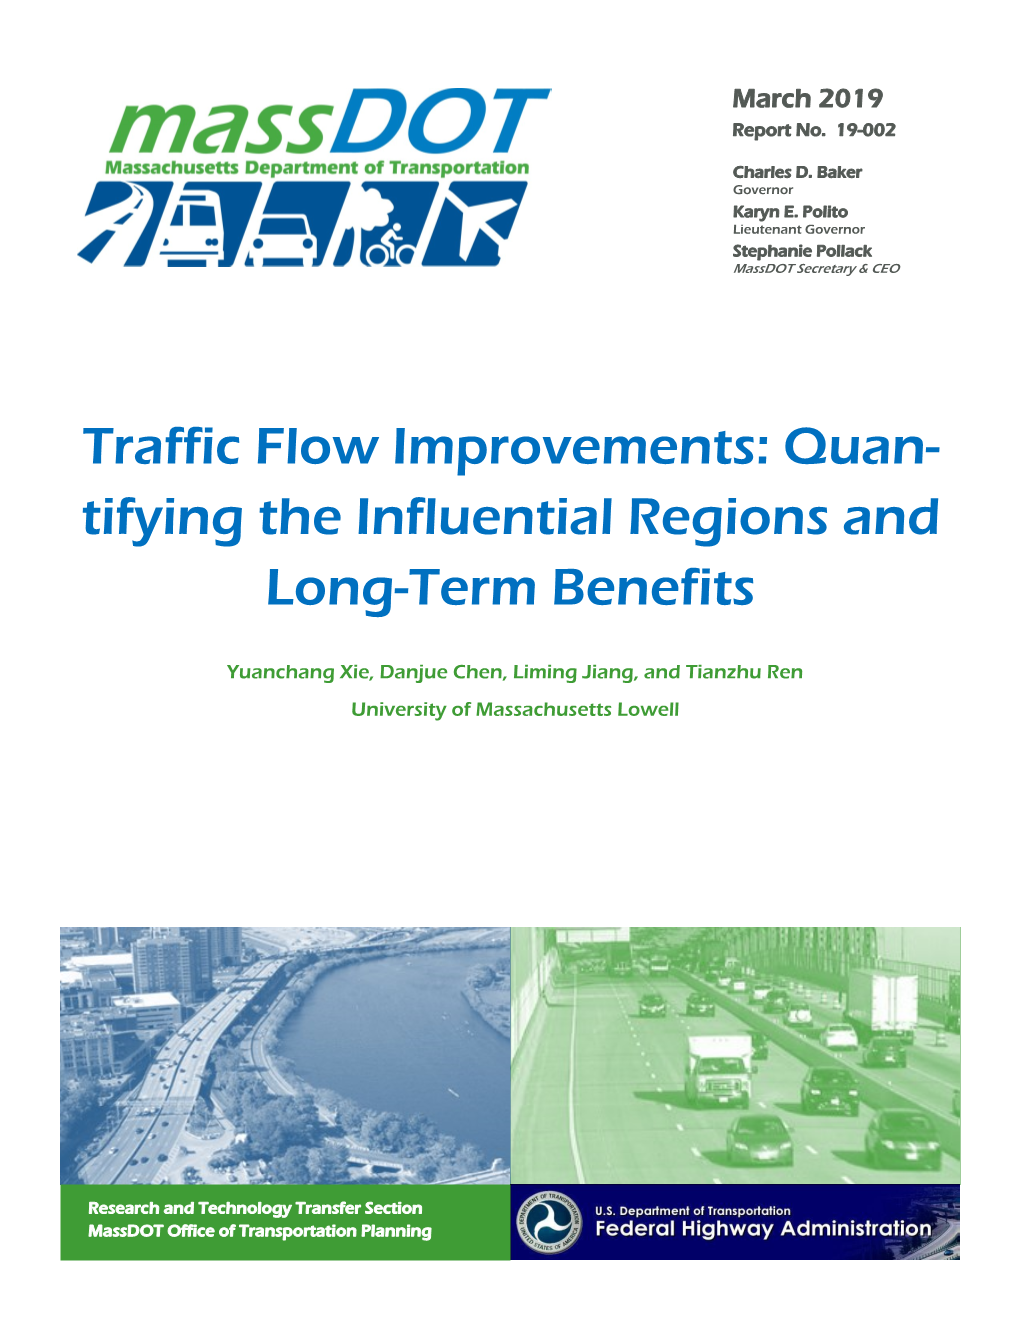 Traffic Flow Improvements: Quantifying the Influential Regions and Long-Term Benefits